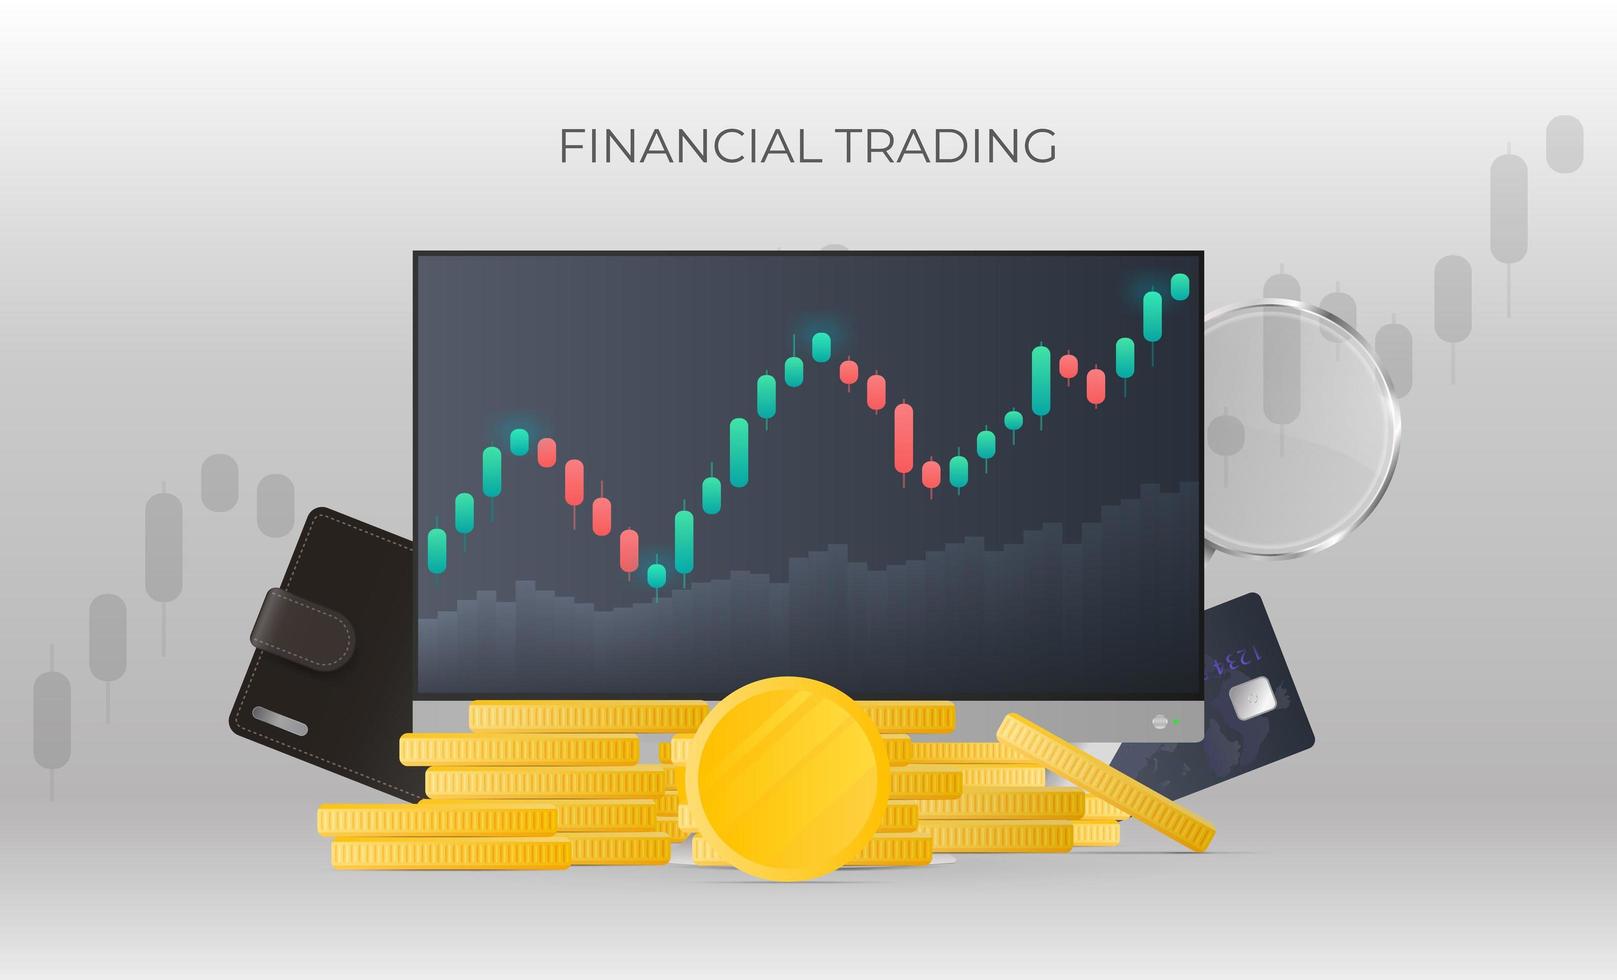 Financial trading banner. Monitor showing stock market quotes, gold coins, bank card, coin and magnifying glass. Stock market investment trading concept. Vector illustration.